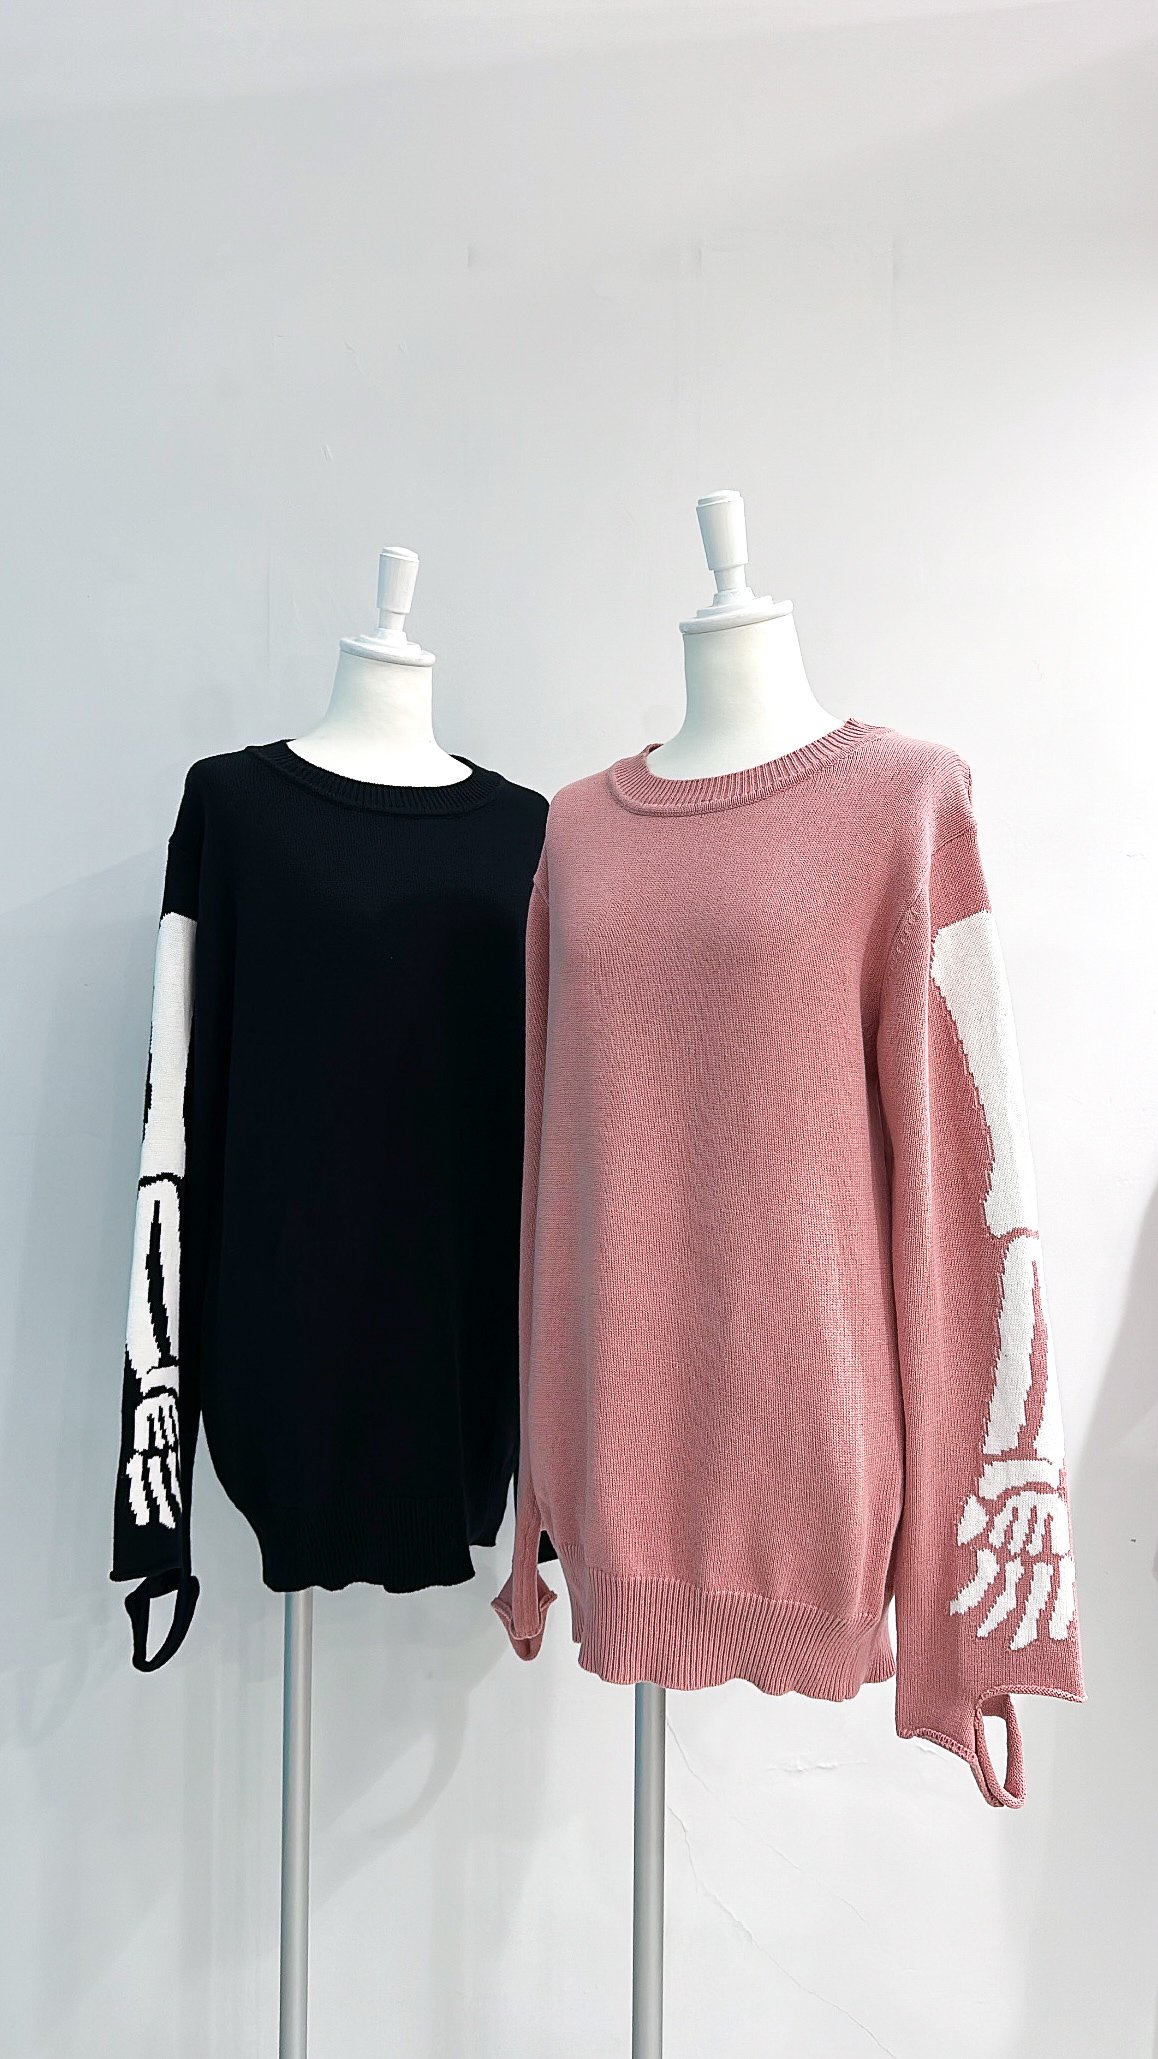 <img class='new_mark_img1' src='https://img.shop-pro.jp/img/new/icons47.gif' style='border:none;display:inline;margin:0px;padding:0px;width:auto;' />skeleton knit pullover